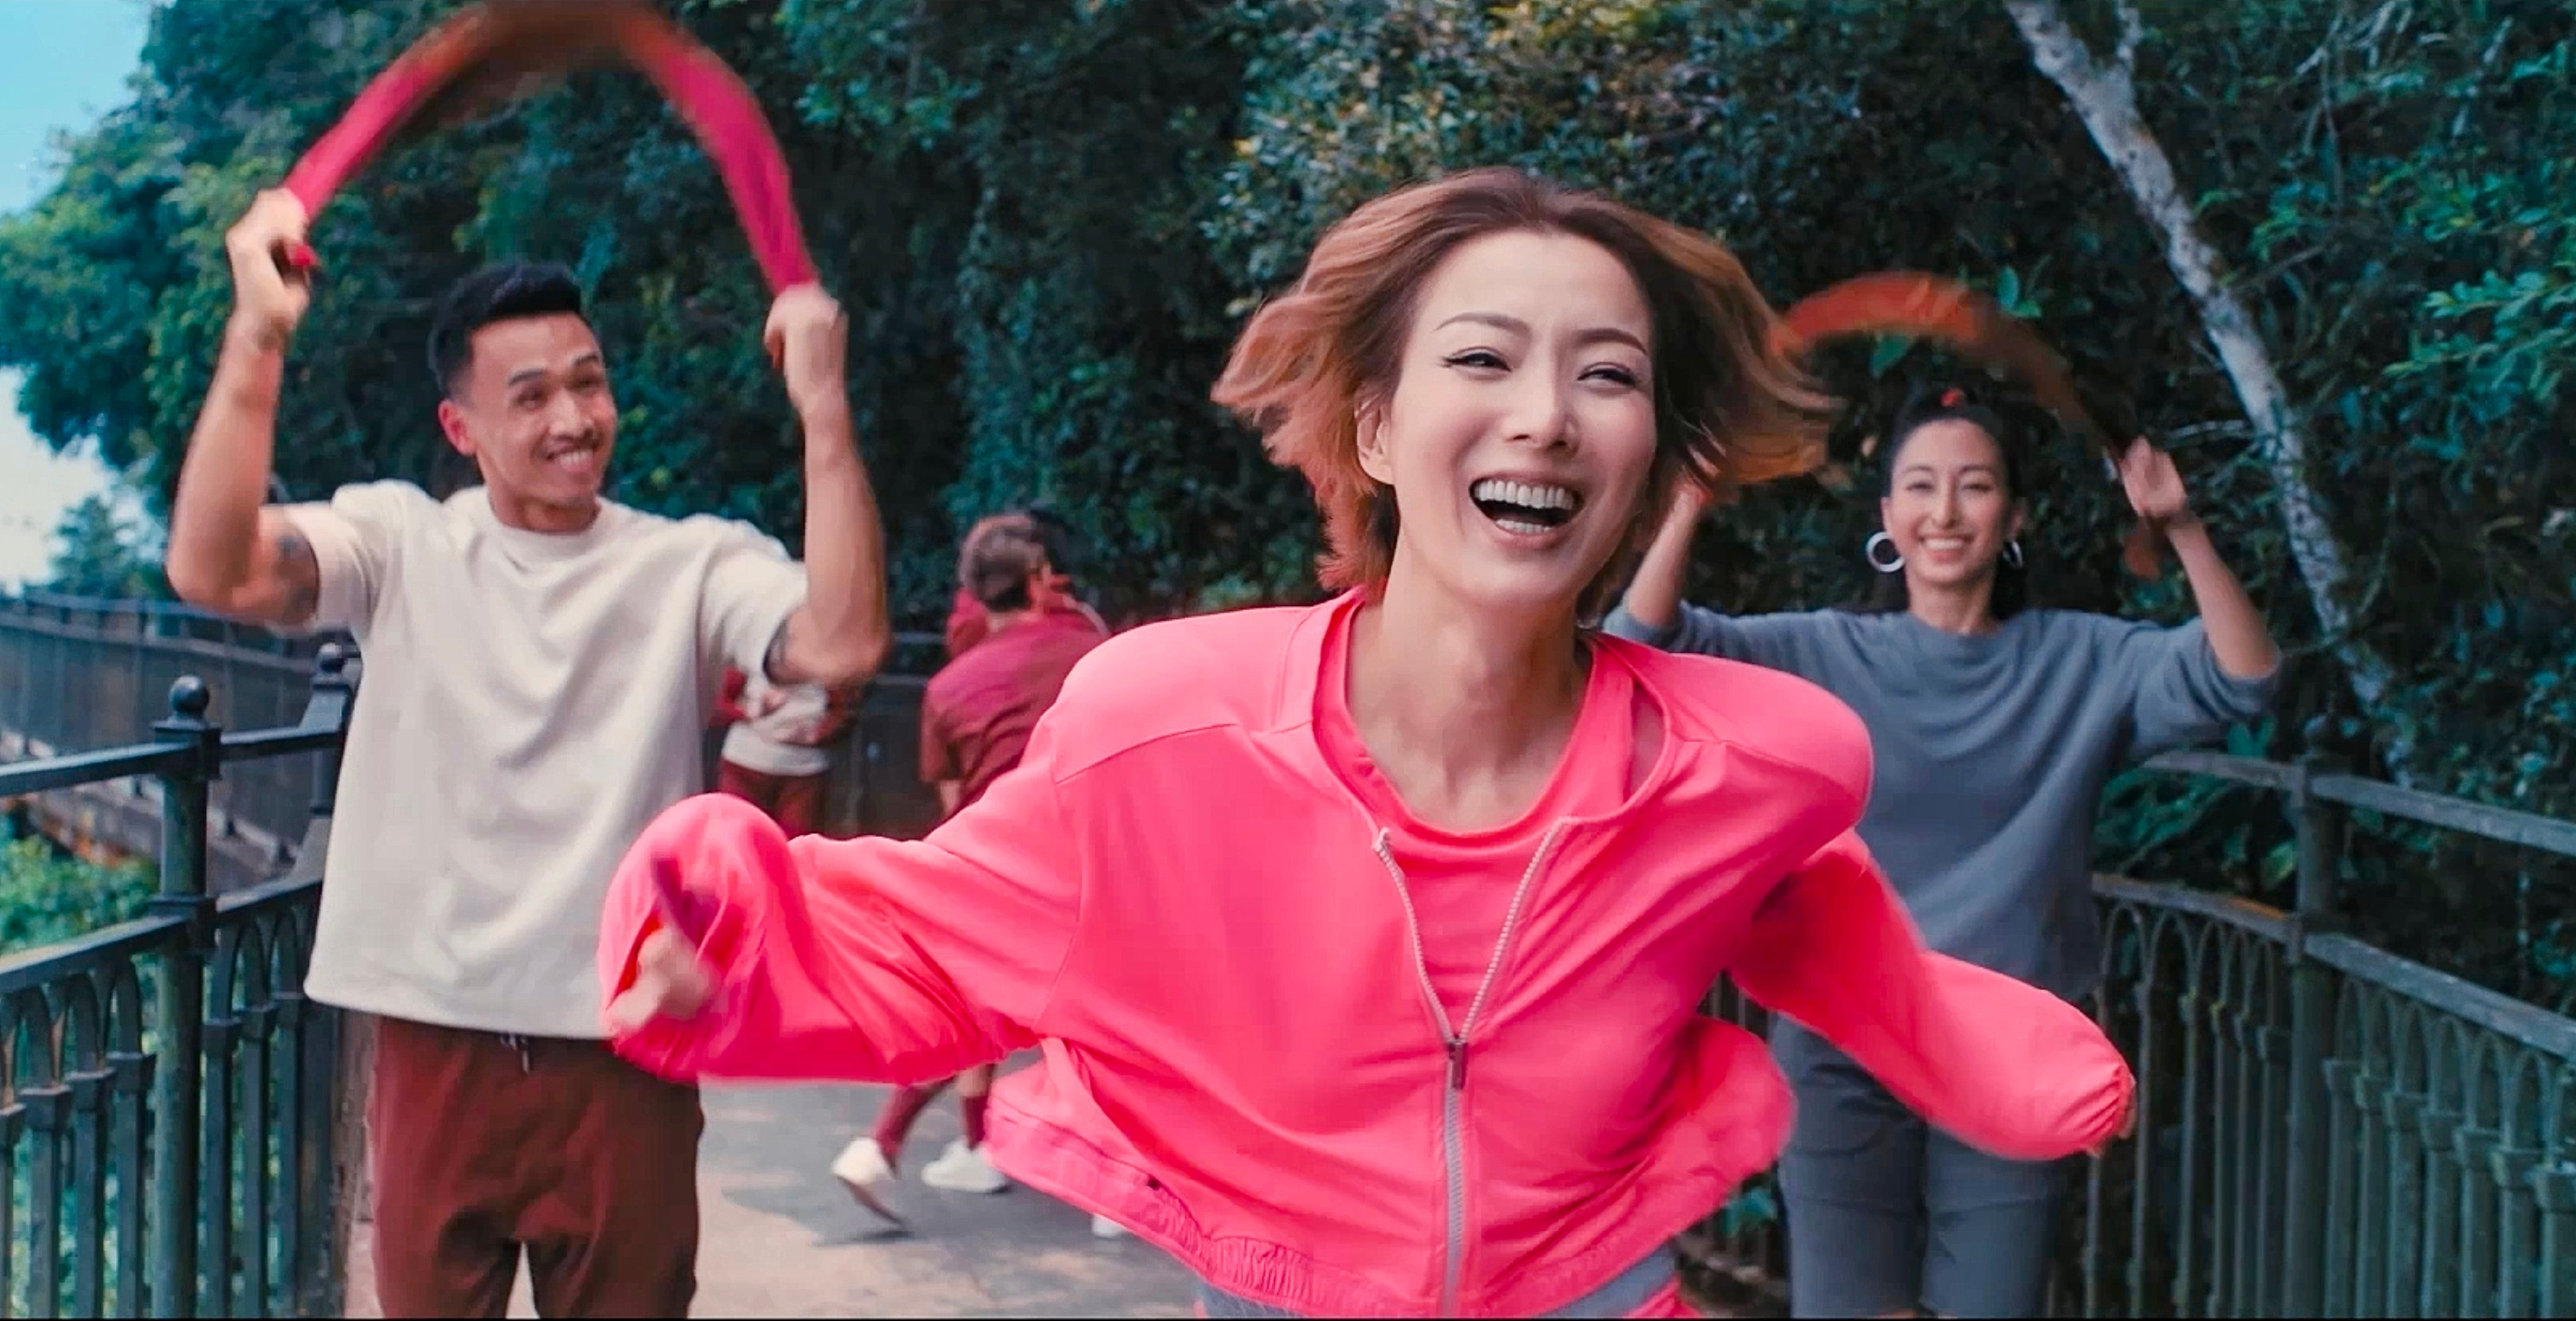 Singer and actress Sammi Cheng in a promotional video for the “Hello Hong Kong” campaign to attract tourists back to the city. Photo: Hong Kong Tourism Board